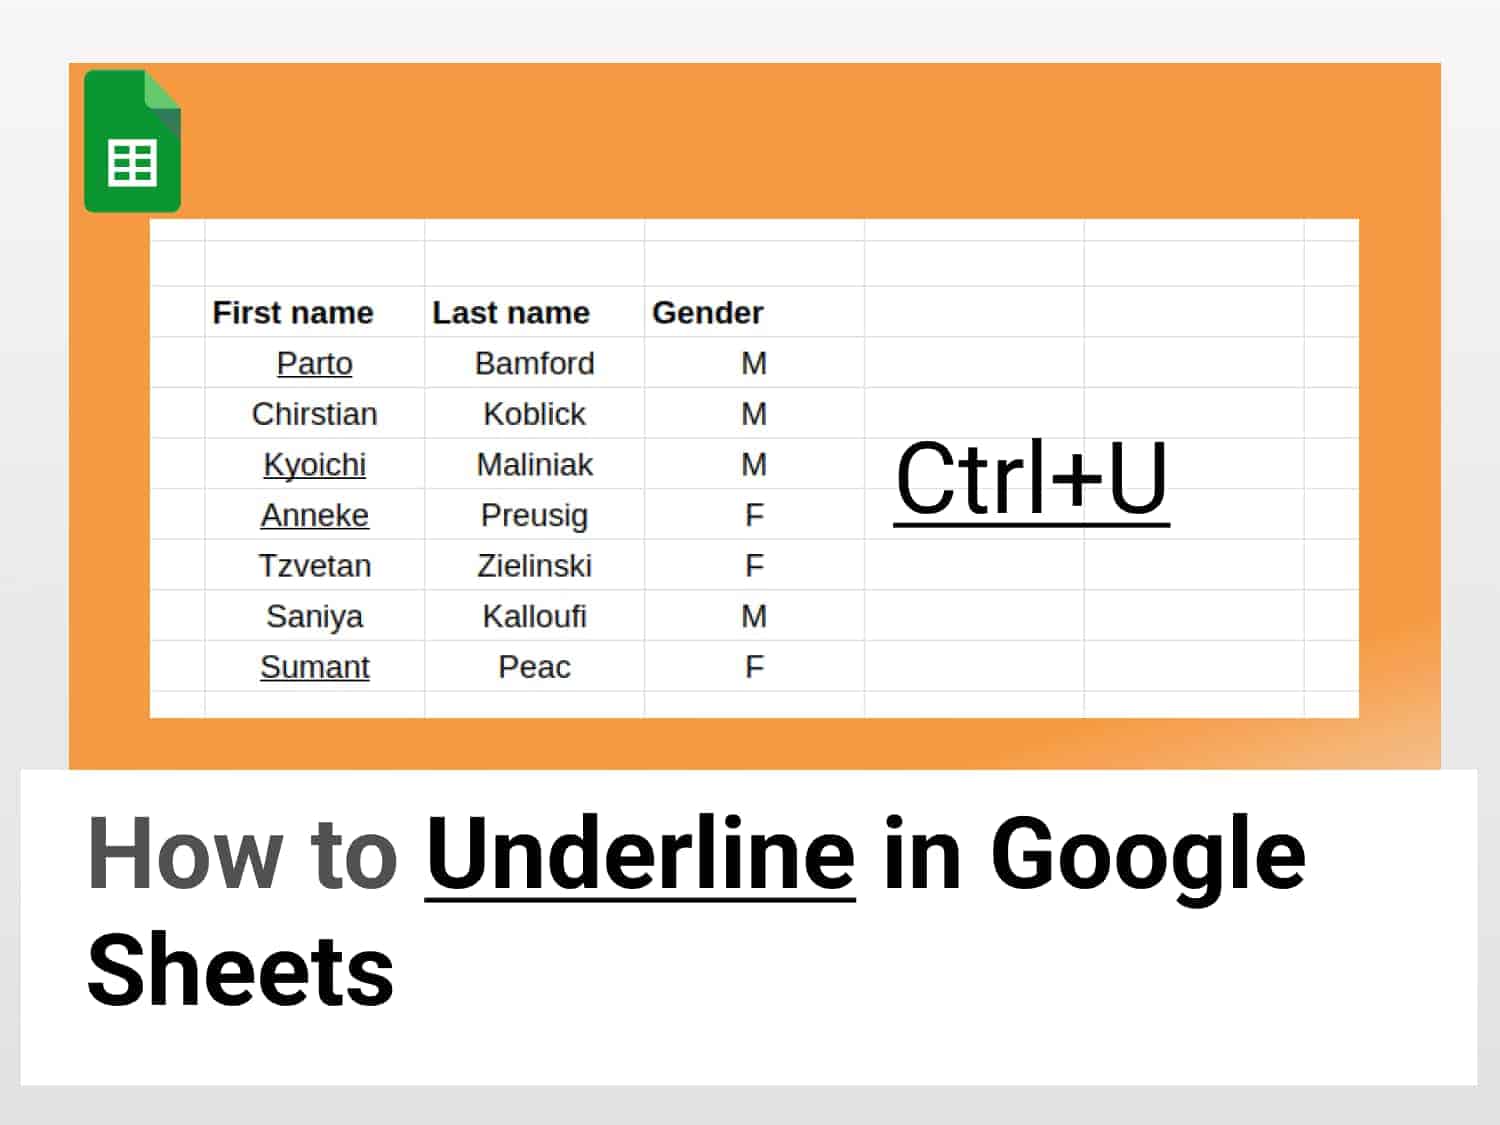 How to underline in Google Sheets